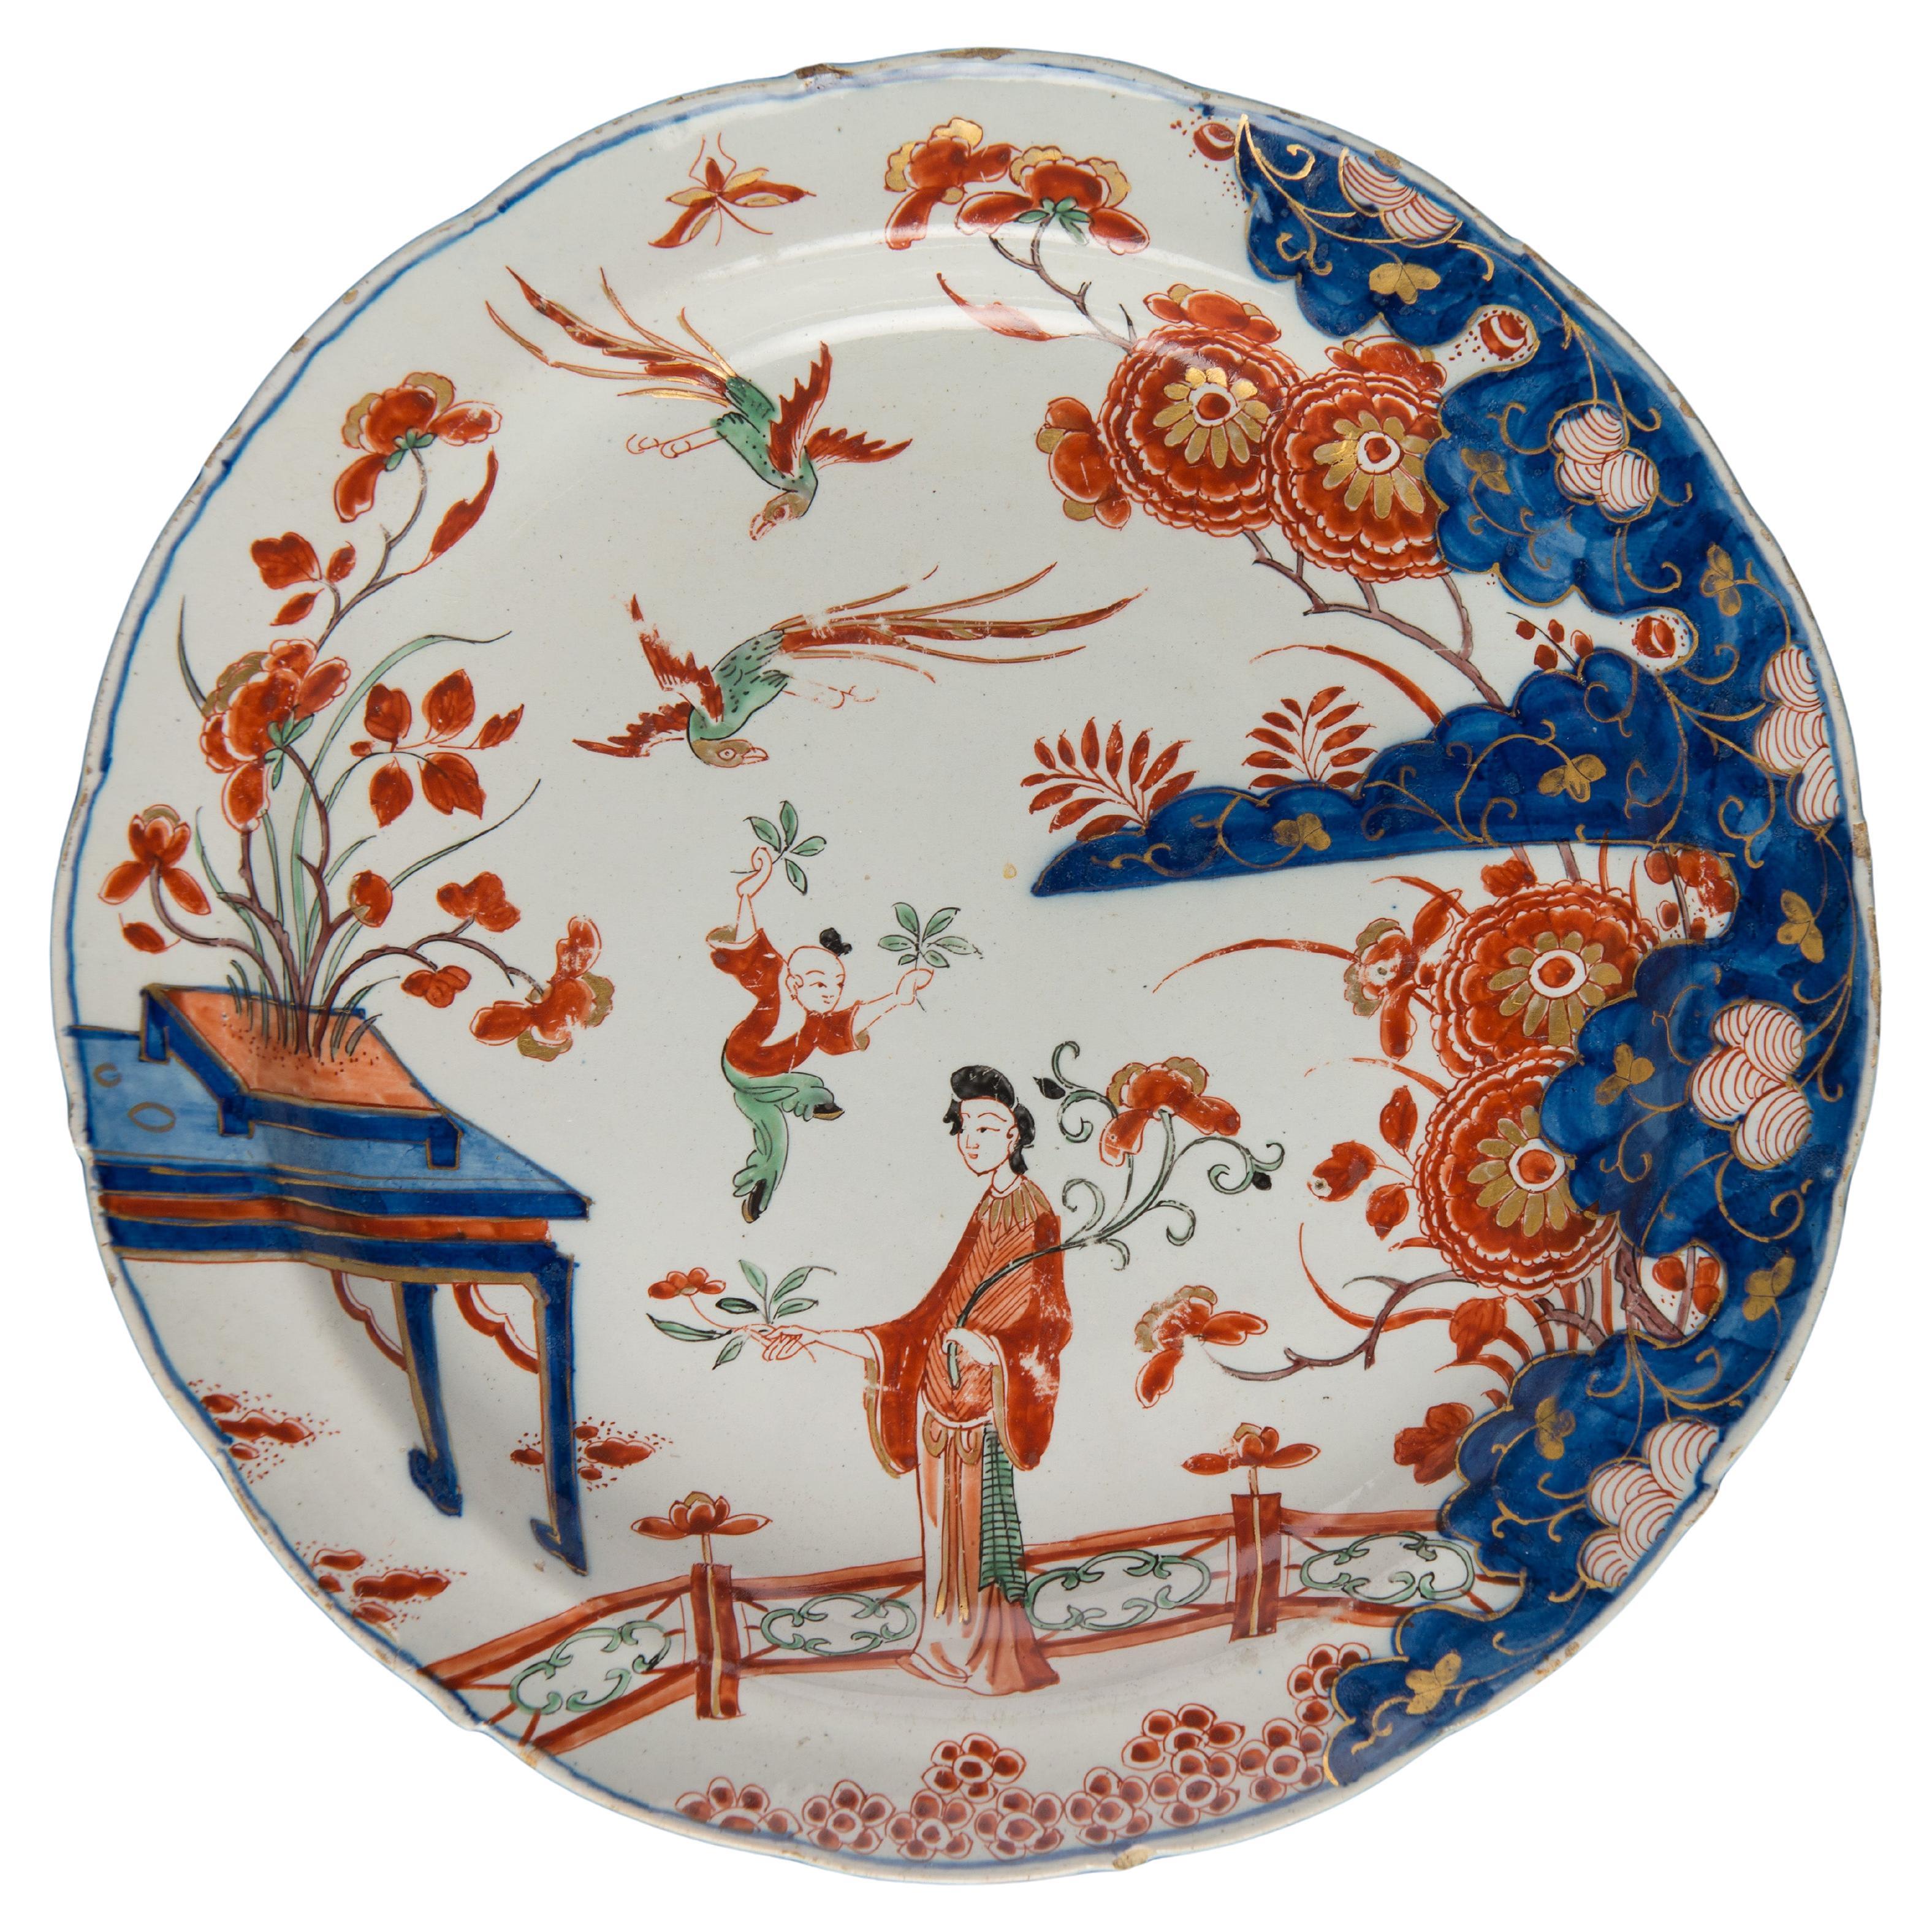 Polychrome and gilded chinoiserie plate, Delft, 1701-1722  The Greek A pottery